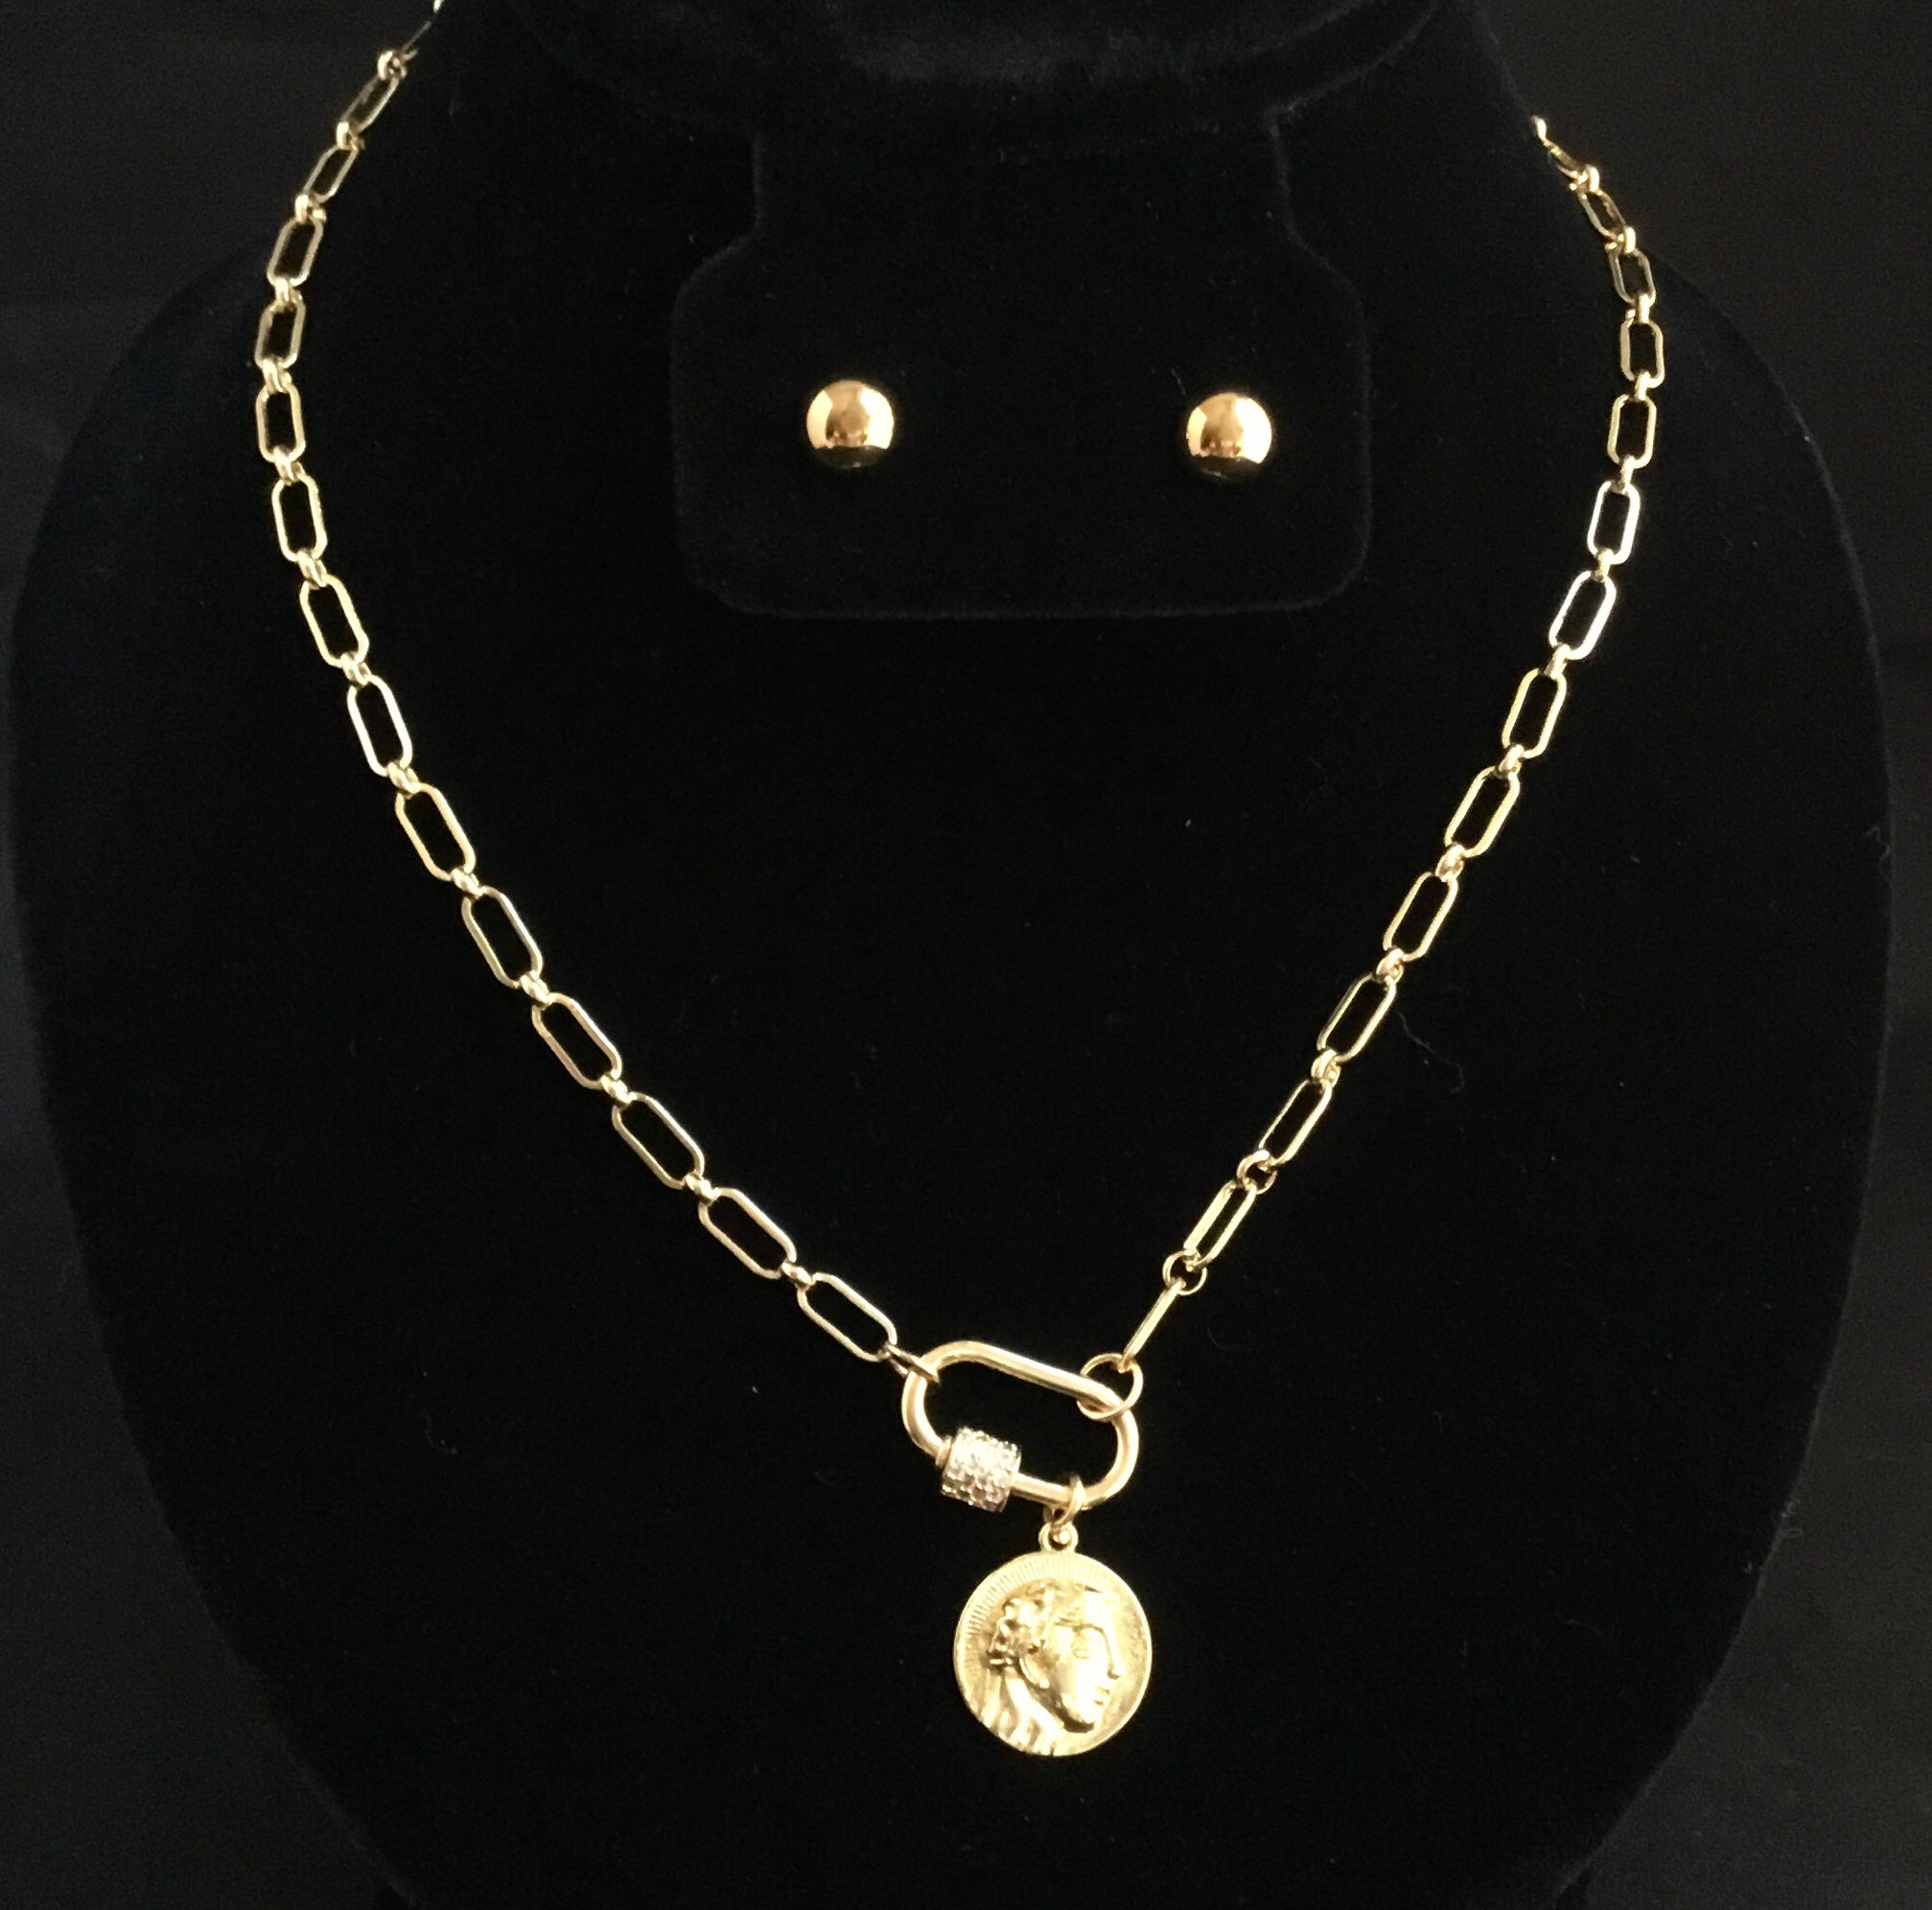 Gold Filled Link Necklace whit Lock Charm